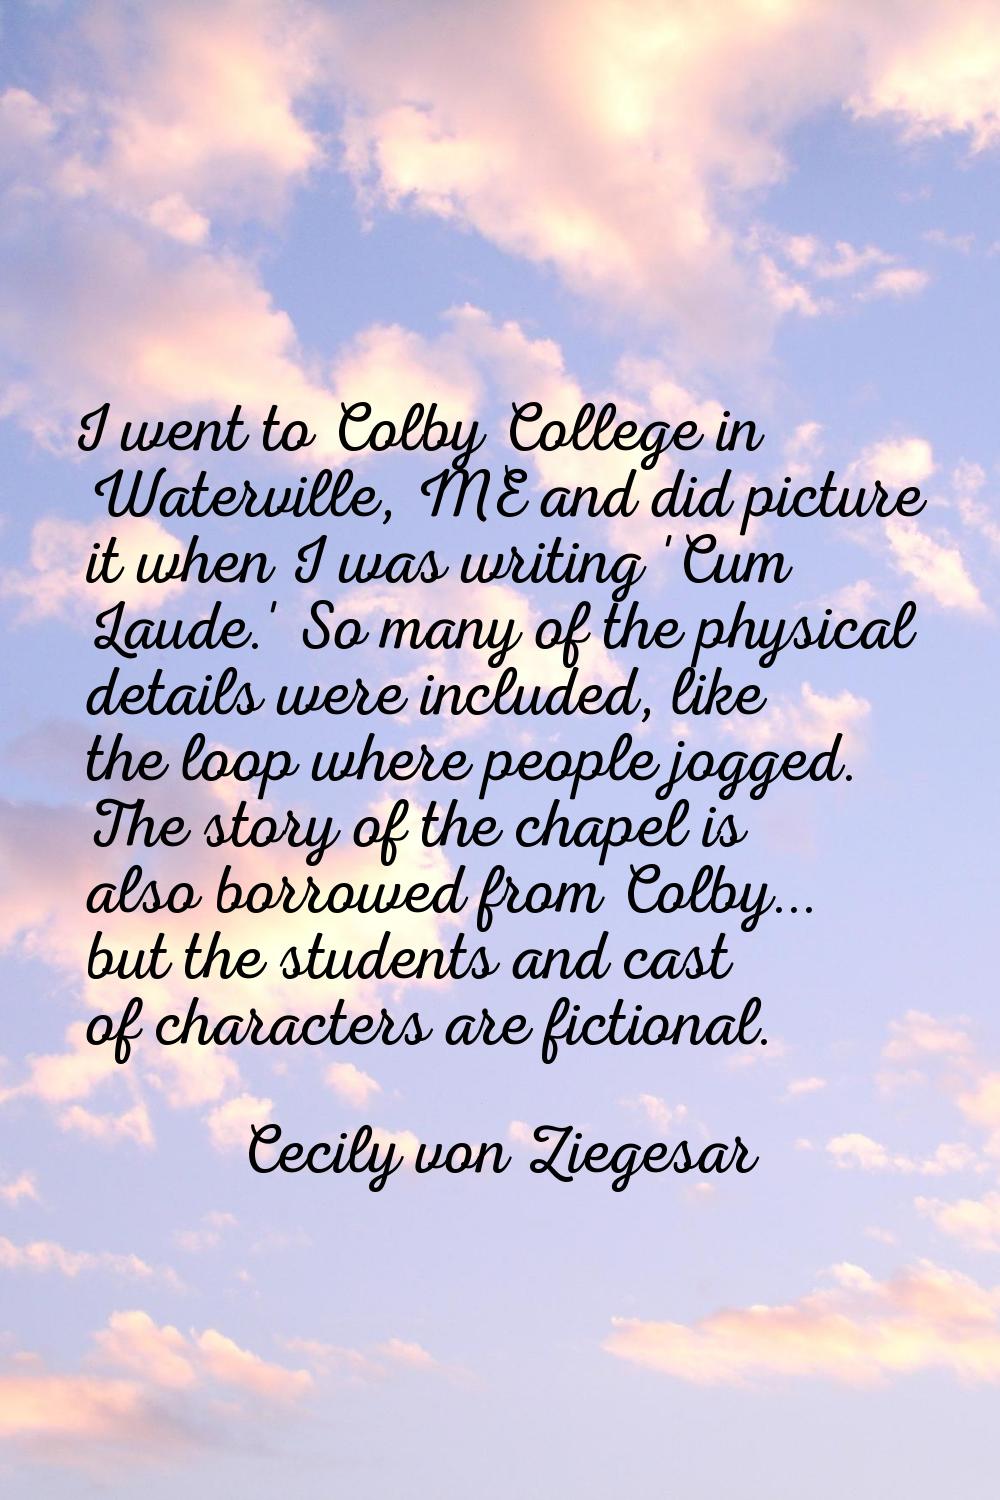 I went to Colby College in Waterville, ME and did picture it when I was writing 'Cum Laude.' So man